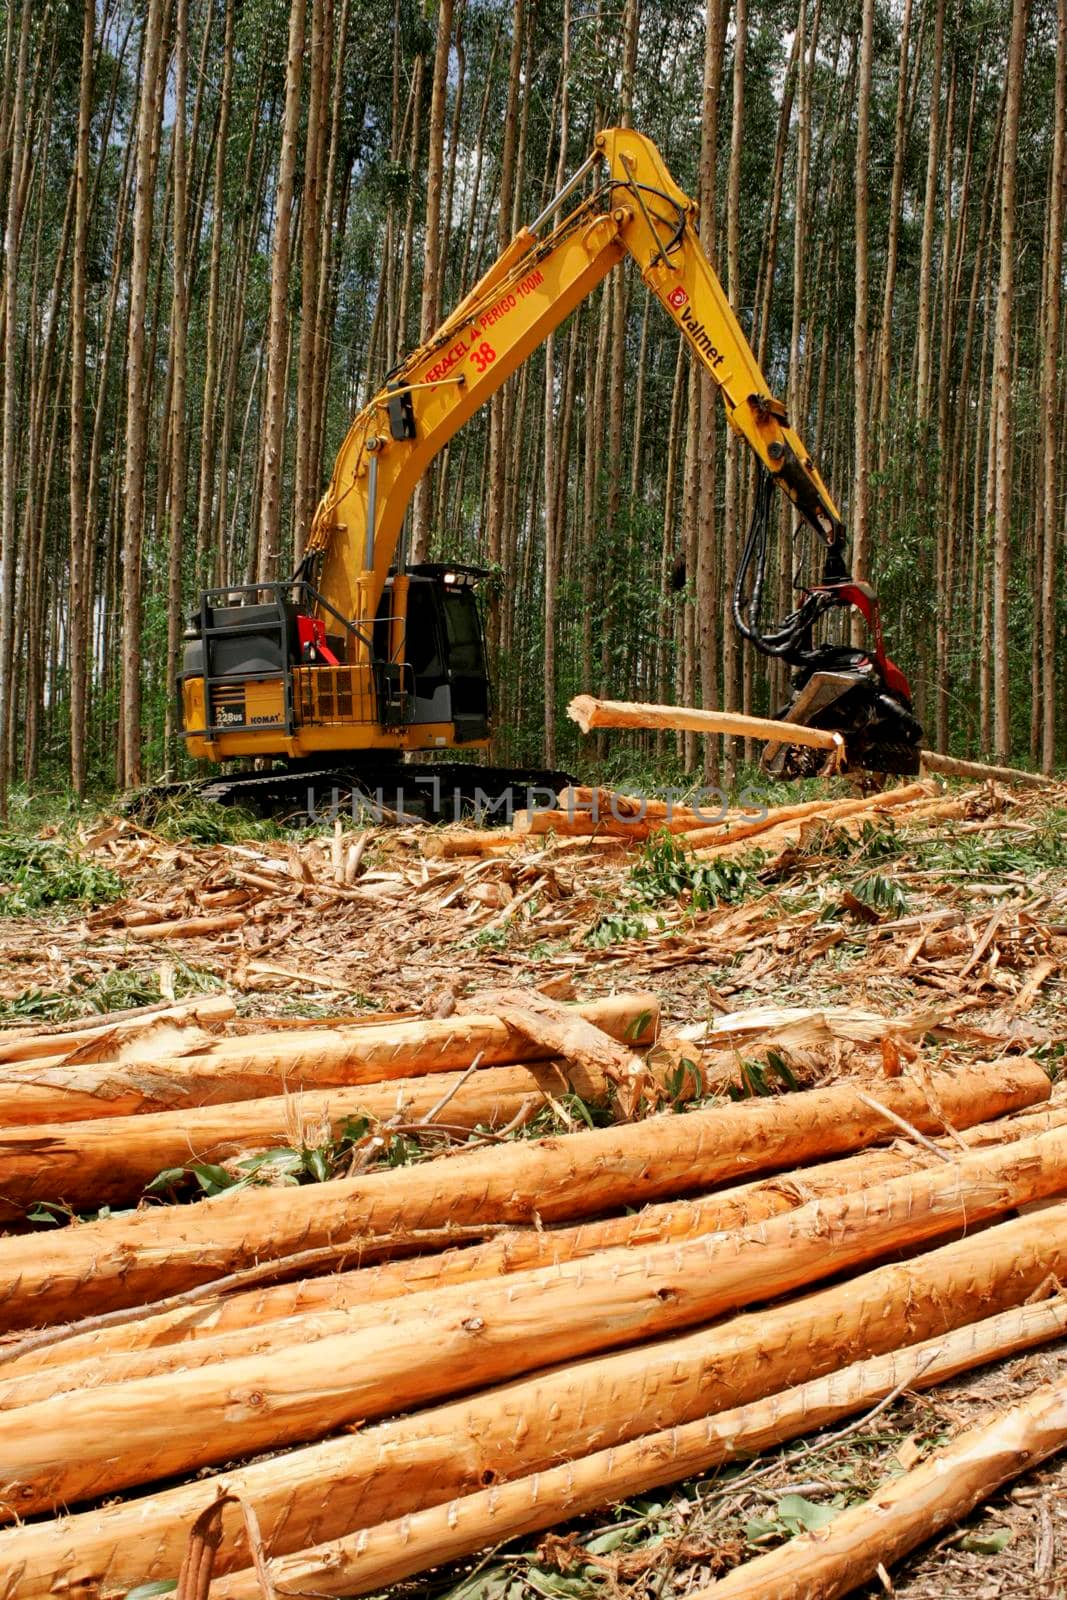 eunapolis, bahia / brazil - november 26, 2010: Harvester is seen cutting eucalyptus trees for pulp production in a factory in the city of Eunapolis.